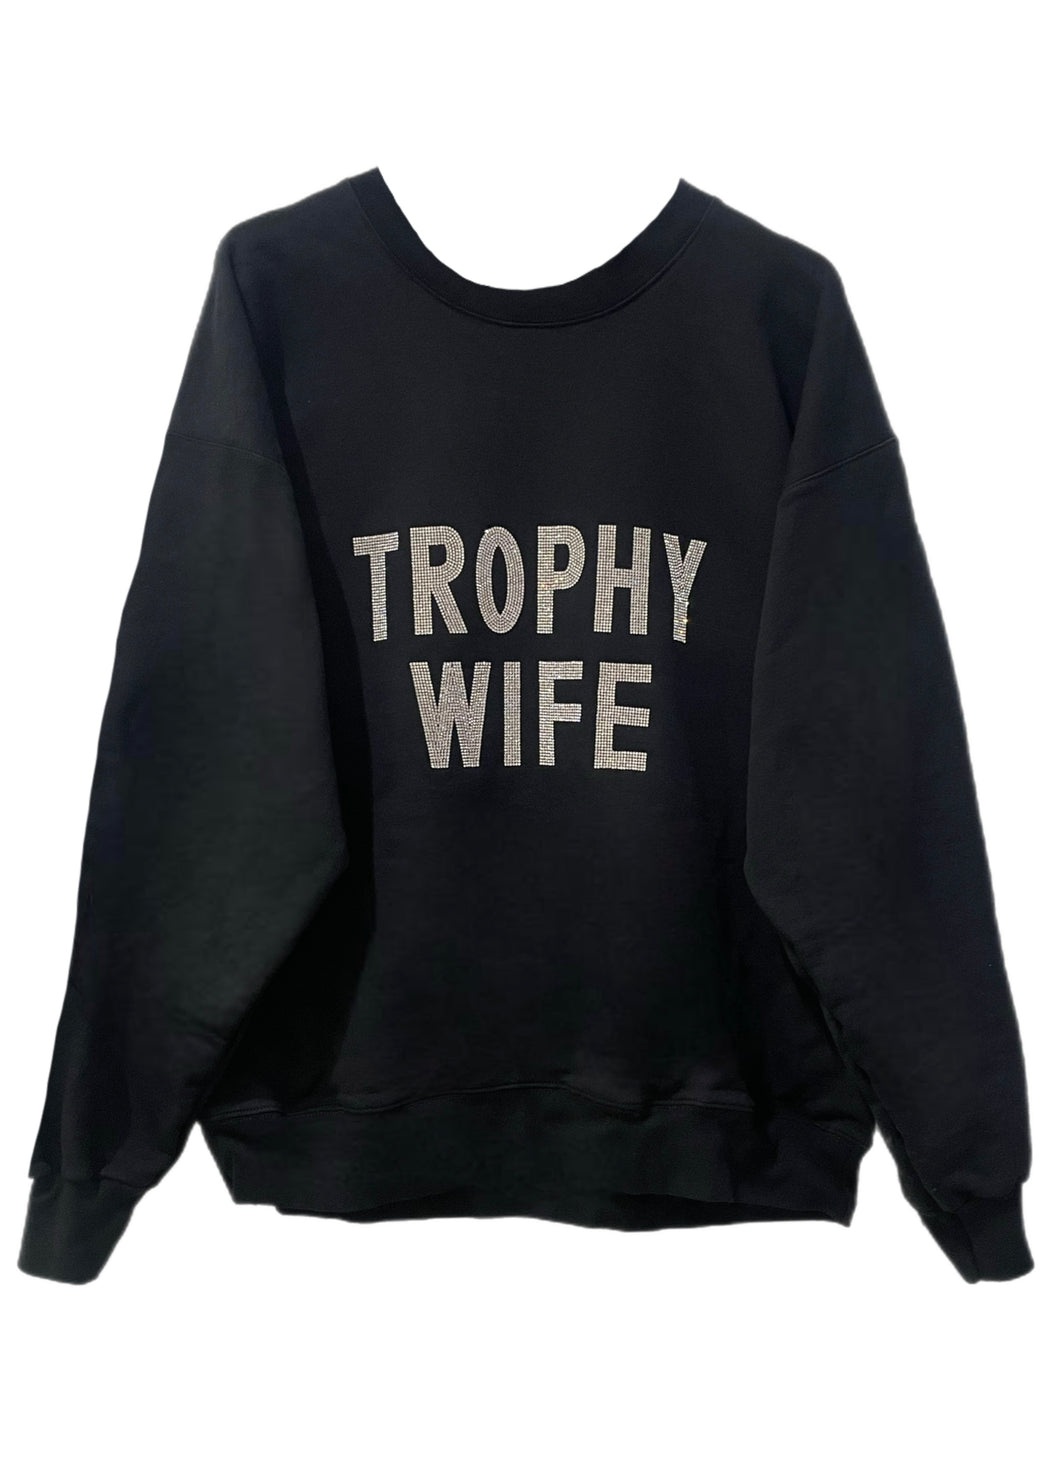 CrystalRags Black Oversized Sweatshirt with“Trophy Wife” in Crystals